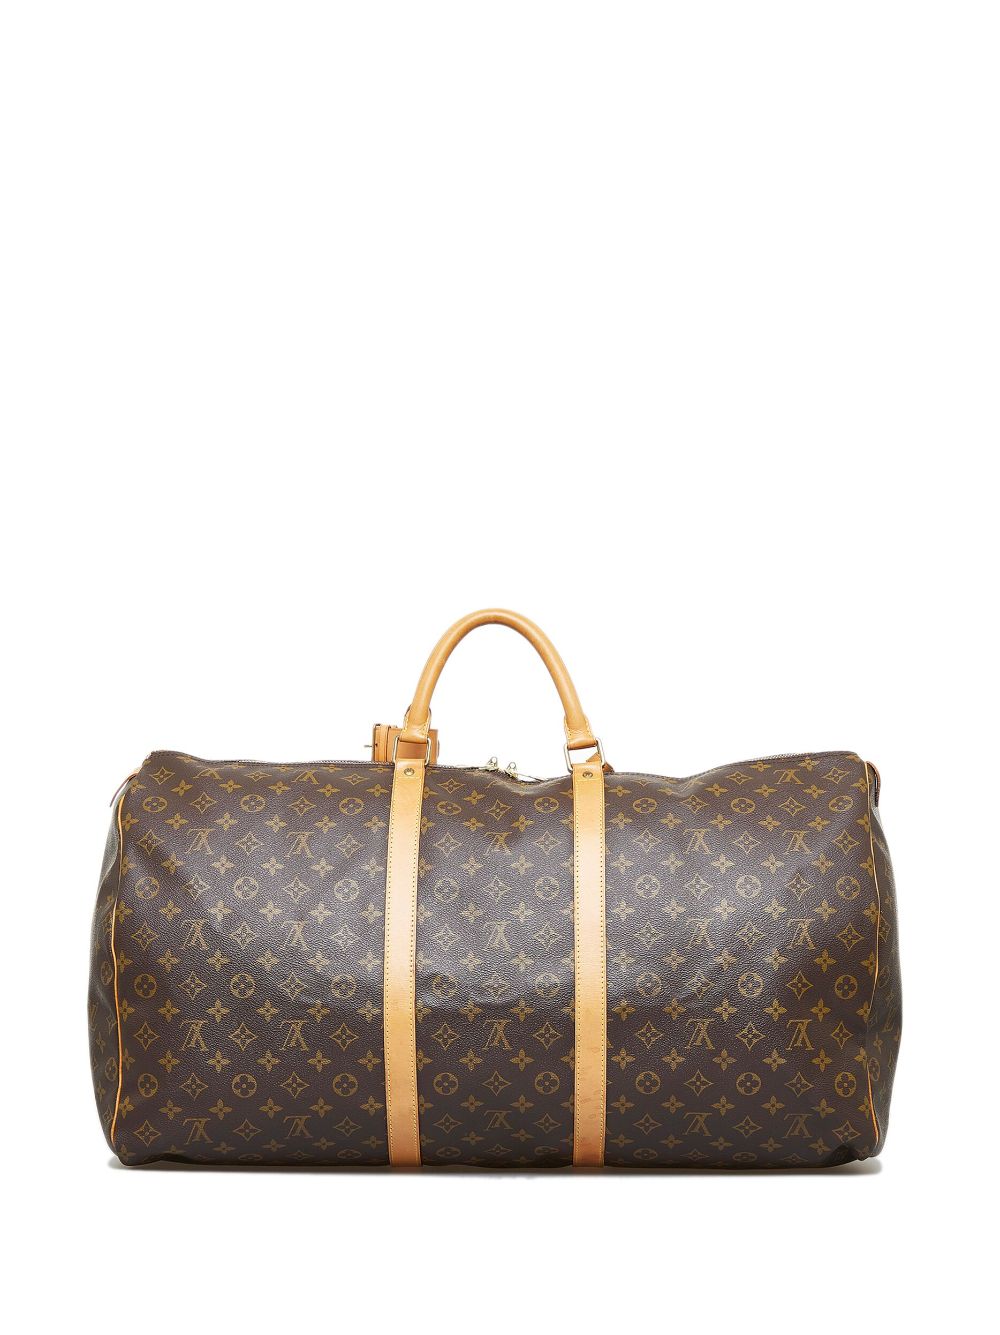 Discontinued Louis Vuitton bags can increase in price by 50% or more w